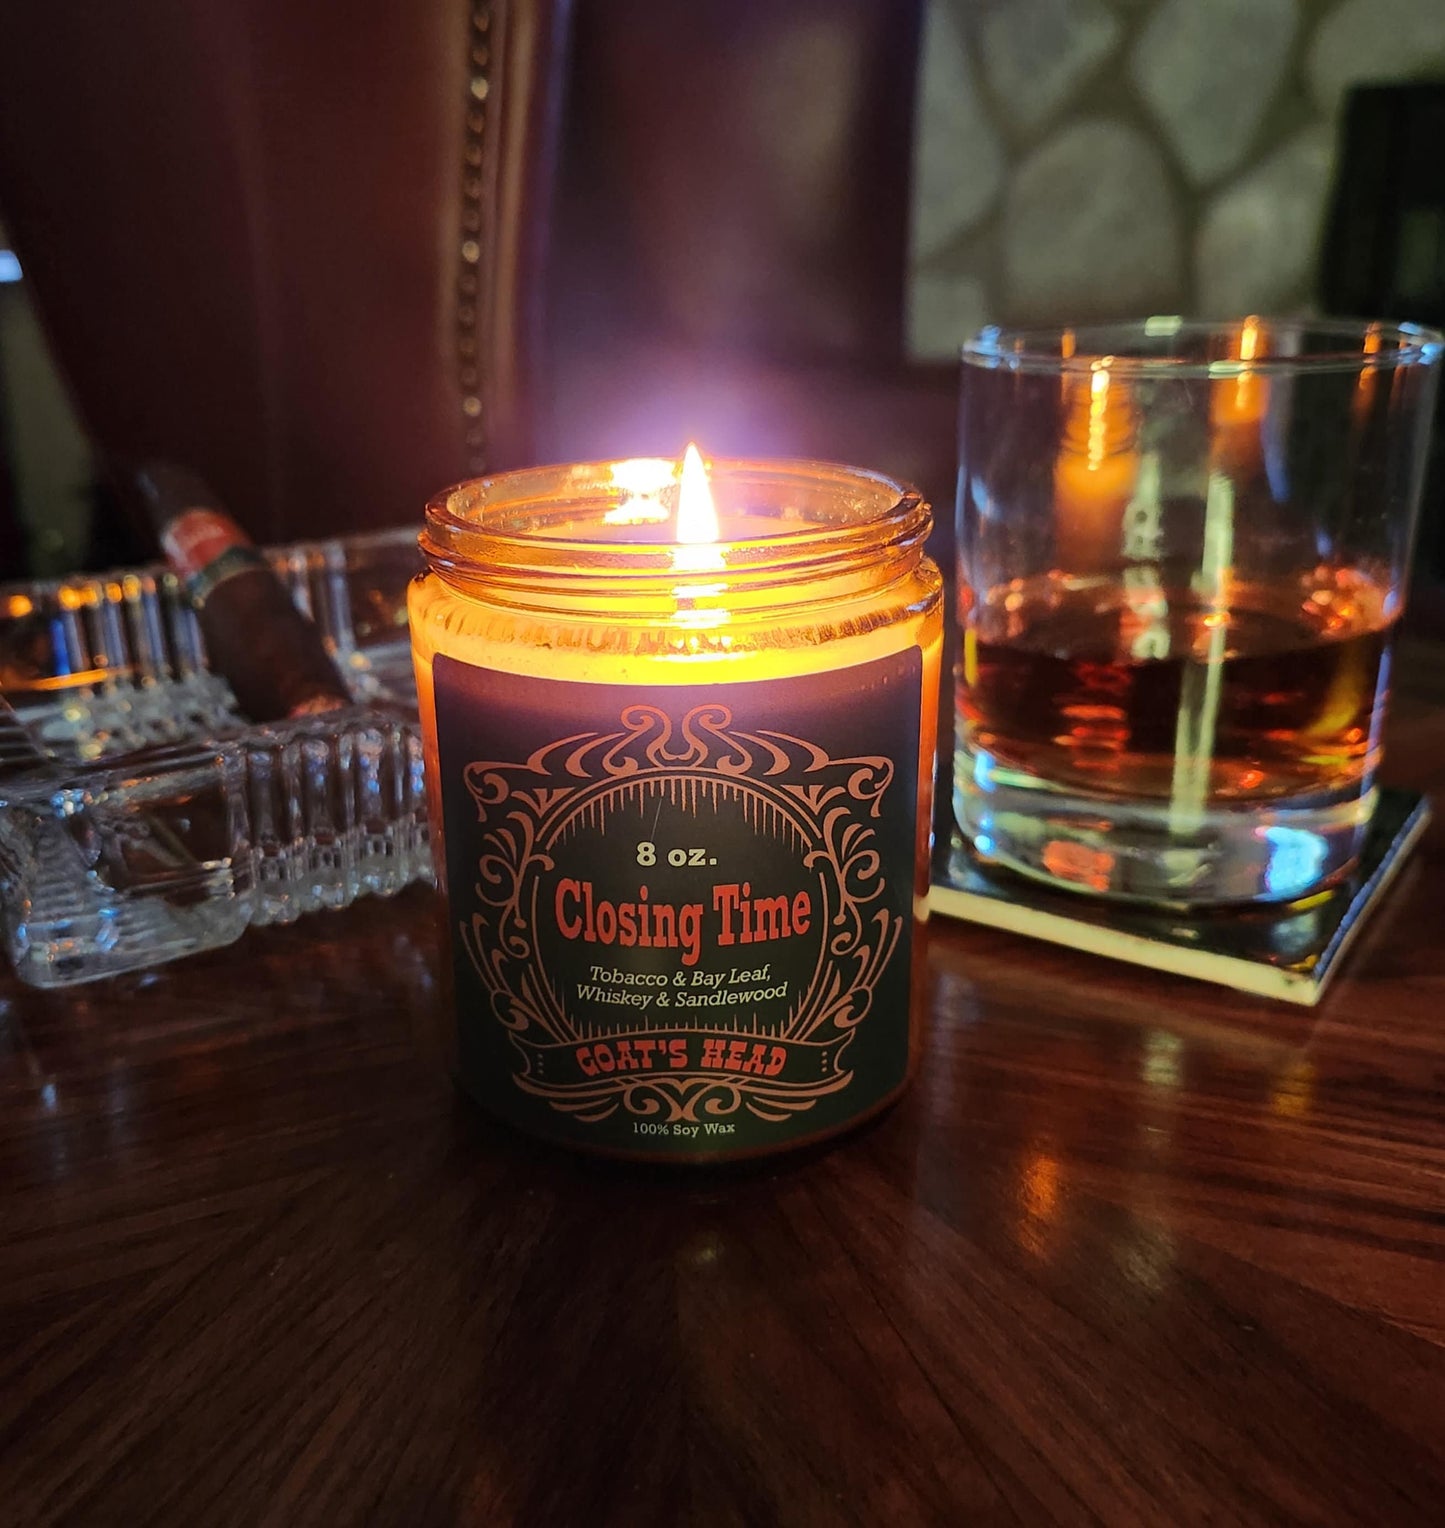 Goat's Head Black Label Edition Candles